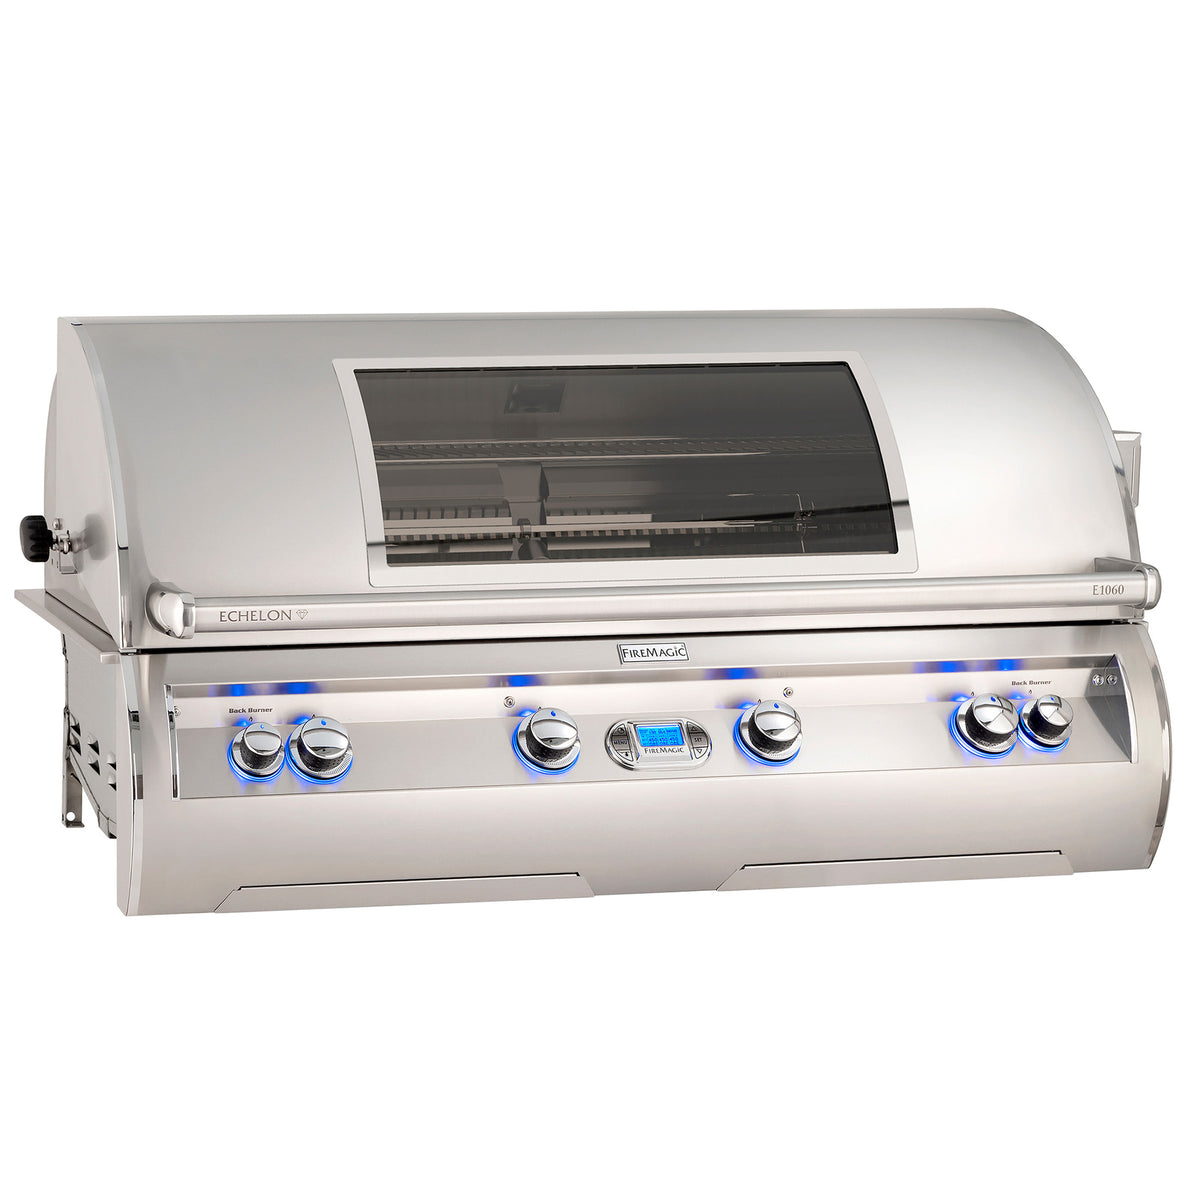 Fire Magic Echelon E1060i Built-In Grill With Digital Thermometer